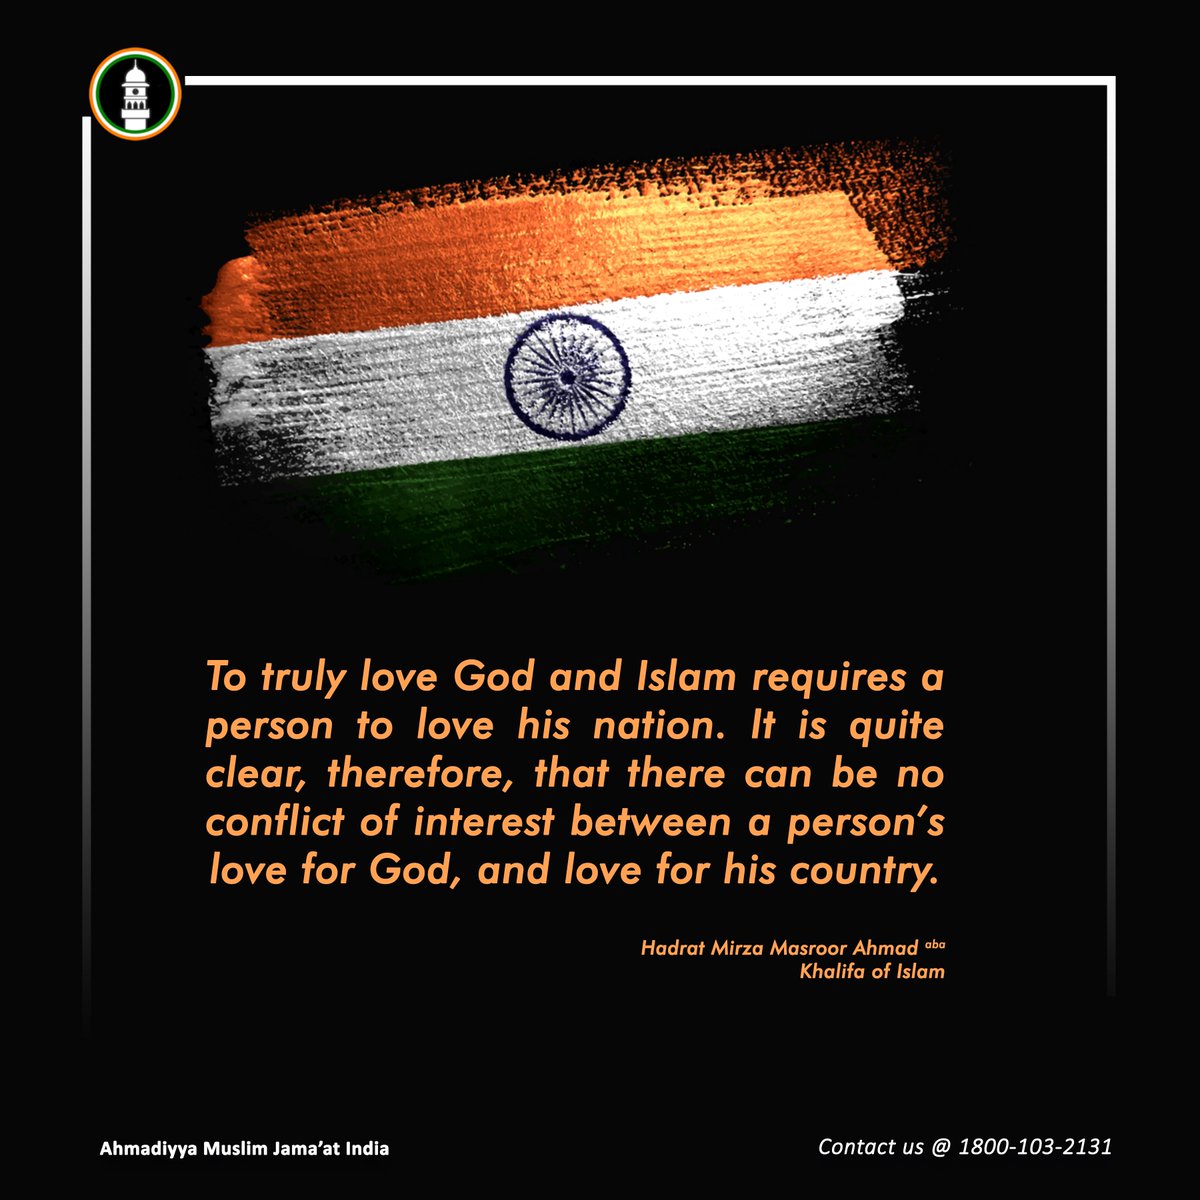 " 𝐈𝐬𝐥𝐚𝐦 𝐚𝐧𝐝 𝐏𝐚𝐭𝐫𝐢𝐨𝐭𝐢𝐬𝐦 "To truly love God and Islam requires a person to love his nation. It is quite clear, therefore, that there can be no conflict of interest between a person’s love for God, and love for his country. #IslamAndPatriotism  #Ahmadiyya